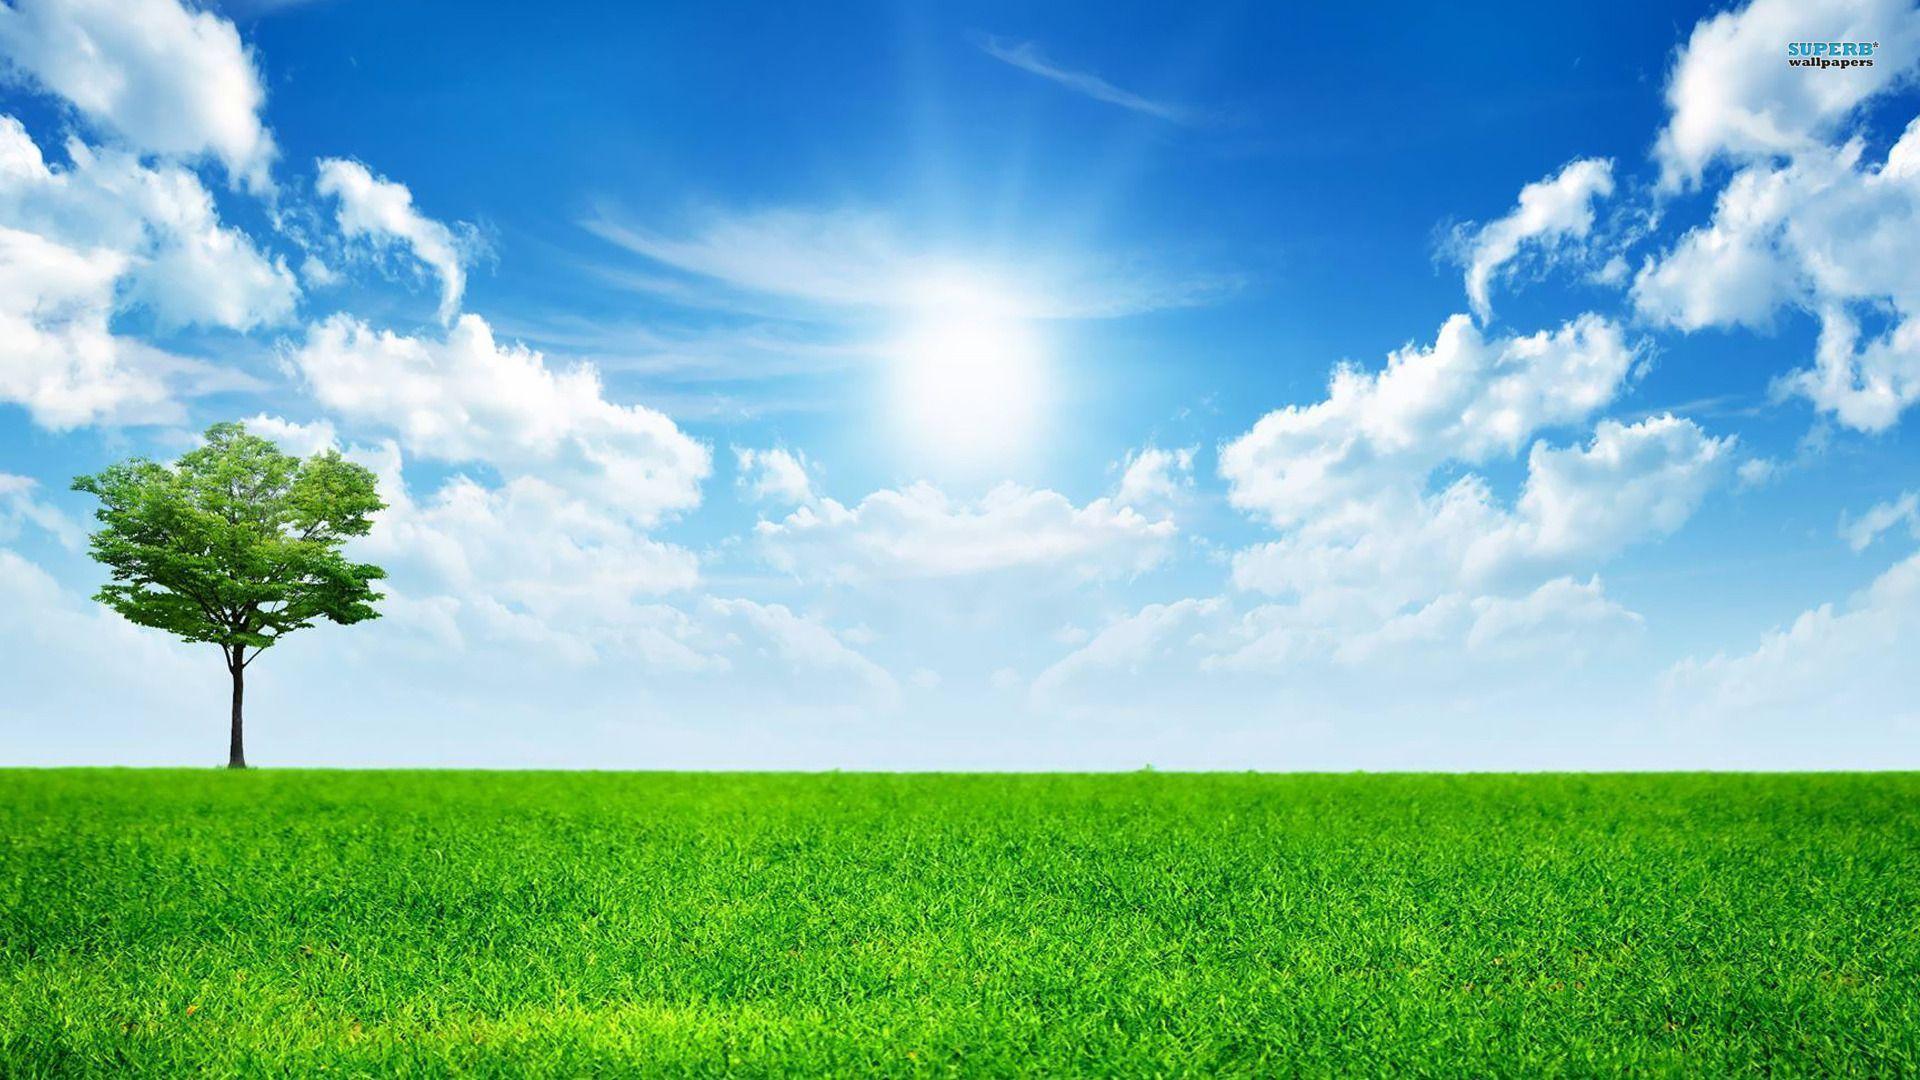 Sunny blue sky wallpapers